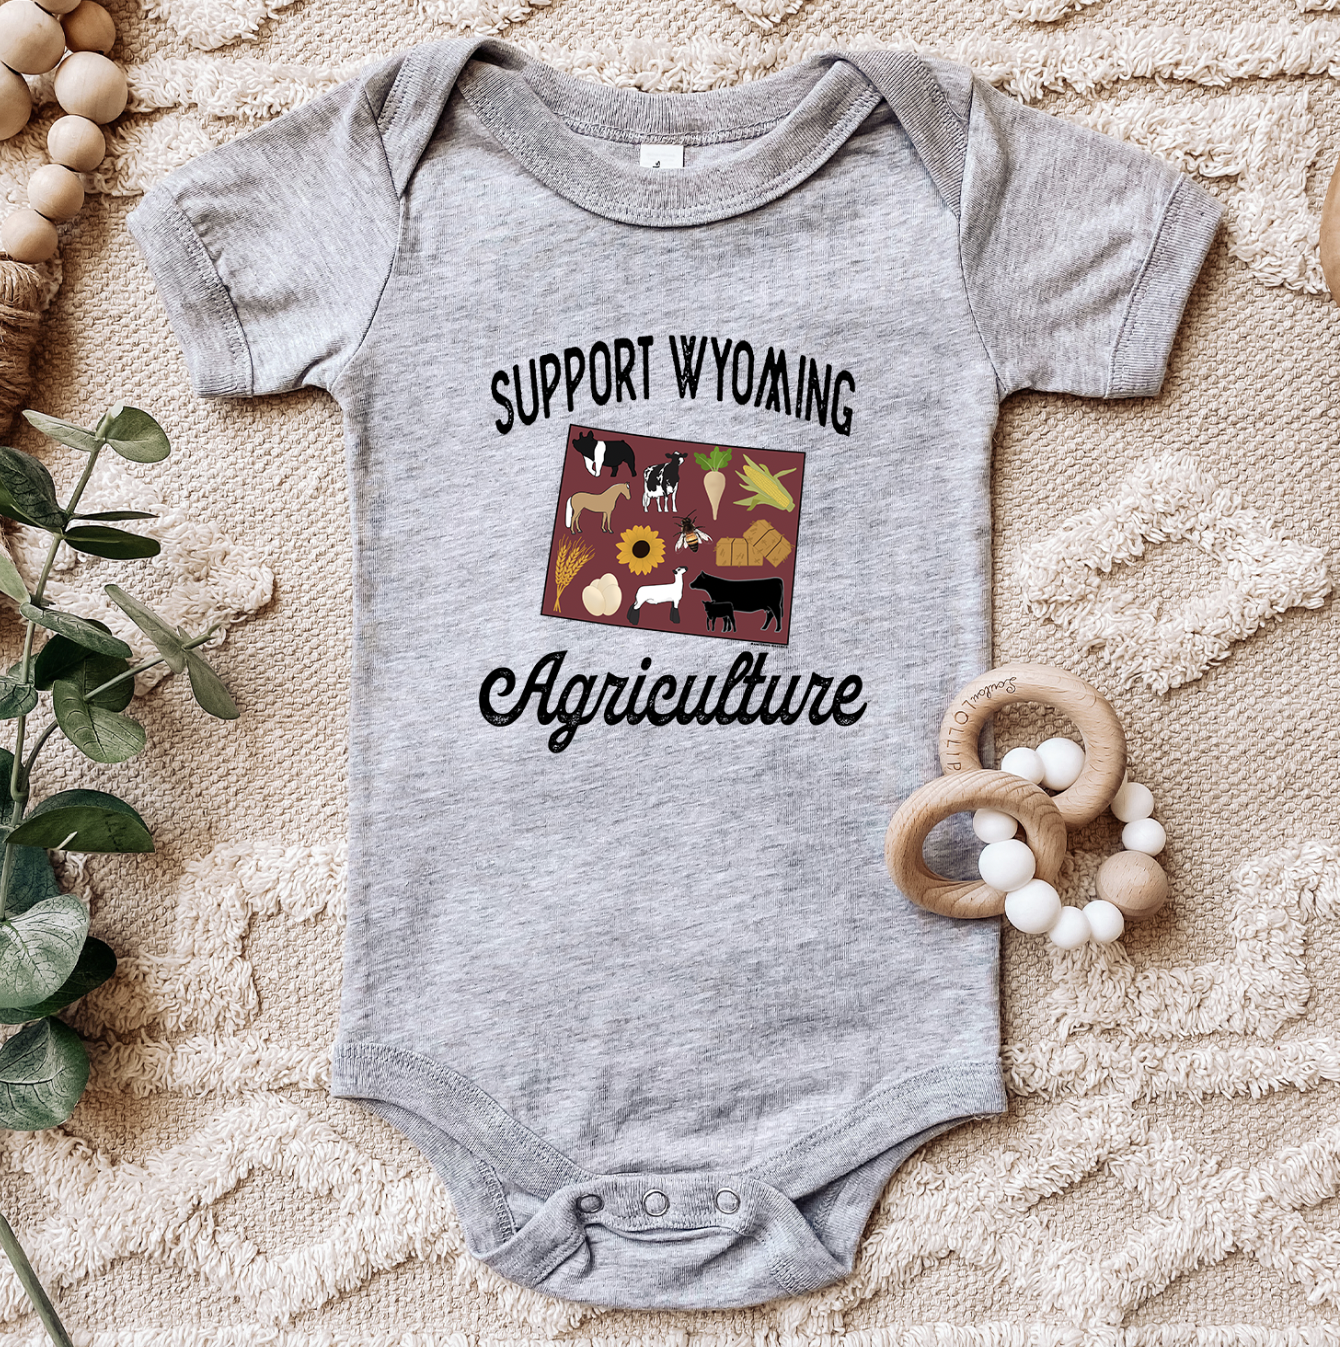 Support Wyoming Agriculture One Piece/T-Shirt (Newborn - Youth XL) - Multiple Colors!